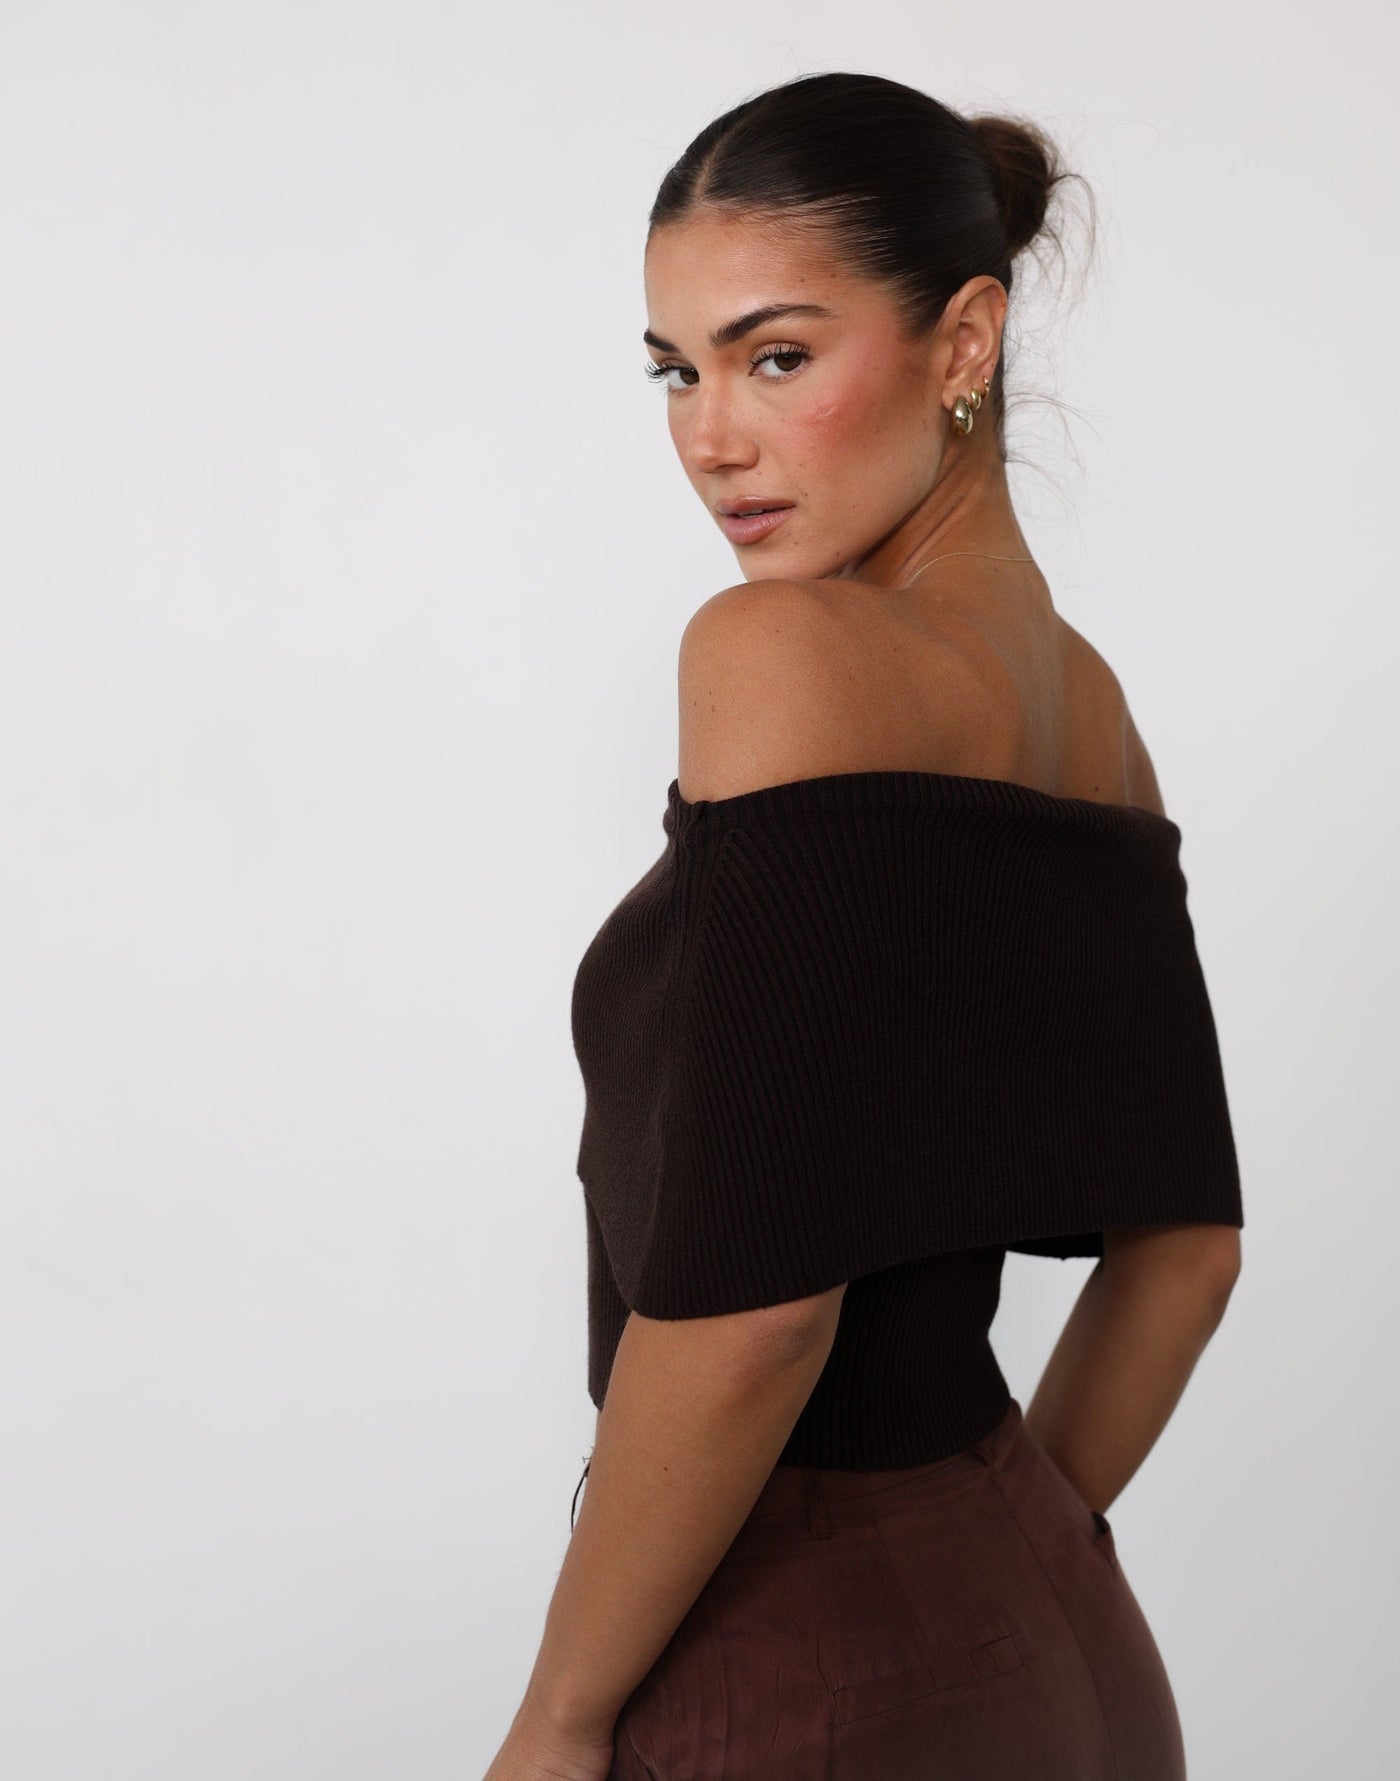 Ambiguity Top (Chocolate) - Knit Cropped Off Shoulder Fold Over Top - Women's Top - Charcoal Clothing